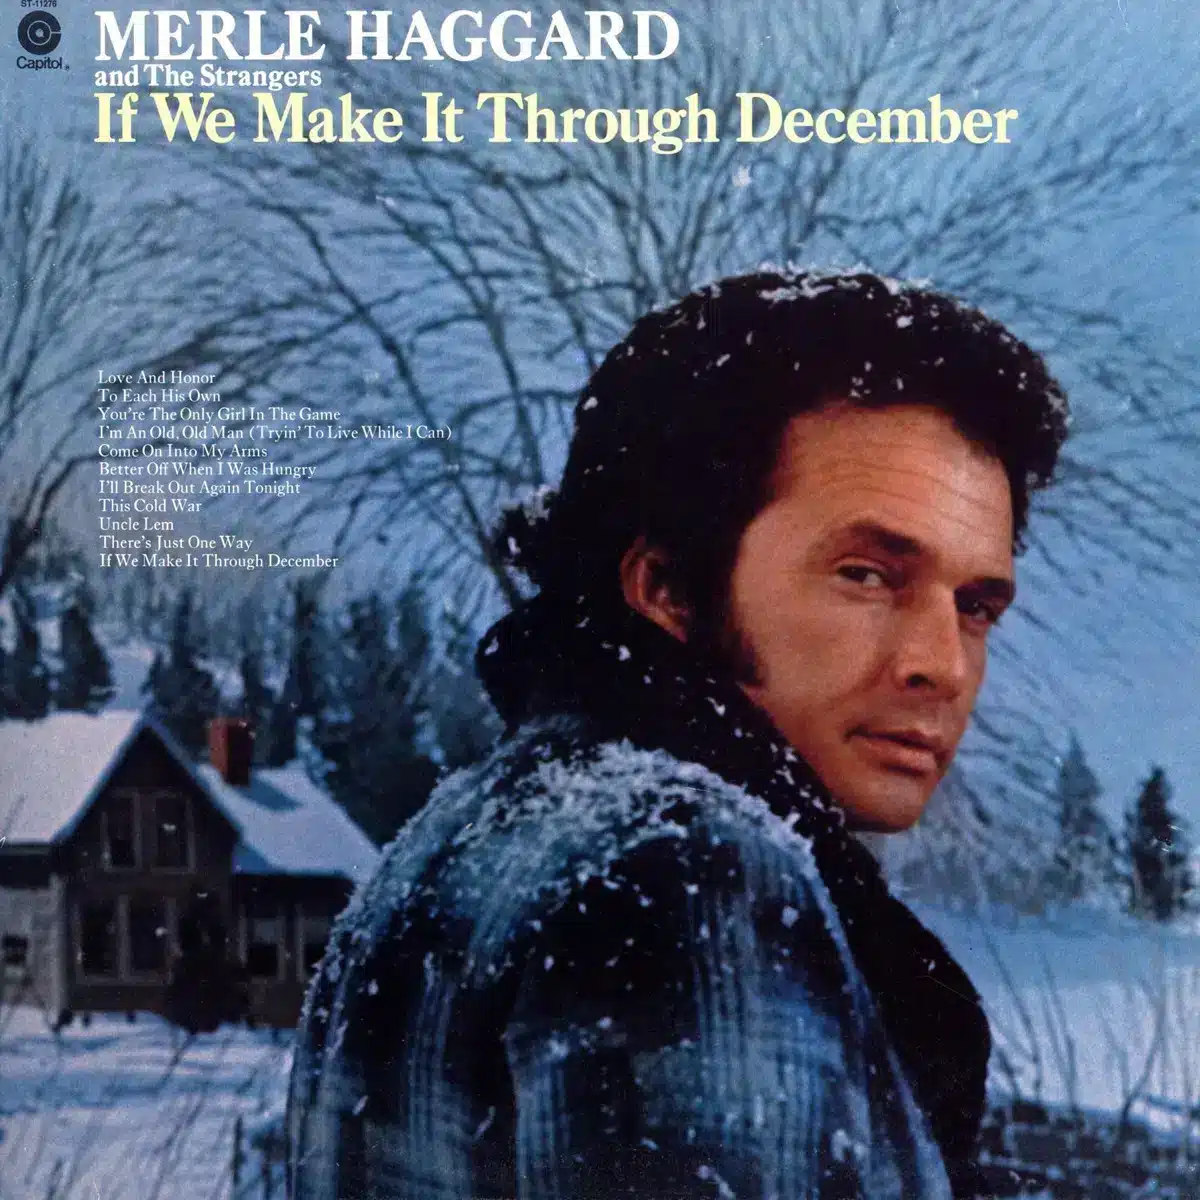 Cover art for the Merle Haggard album "If We Make It Through December"